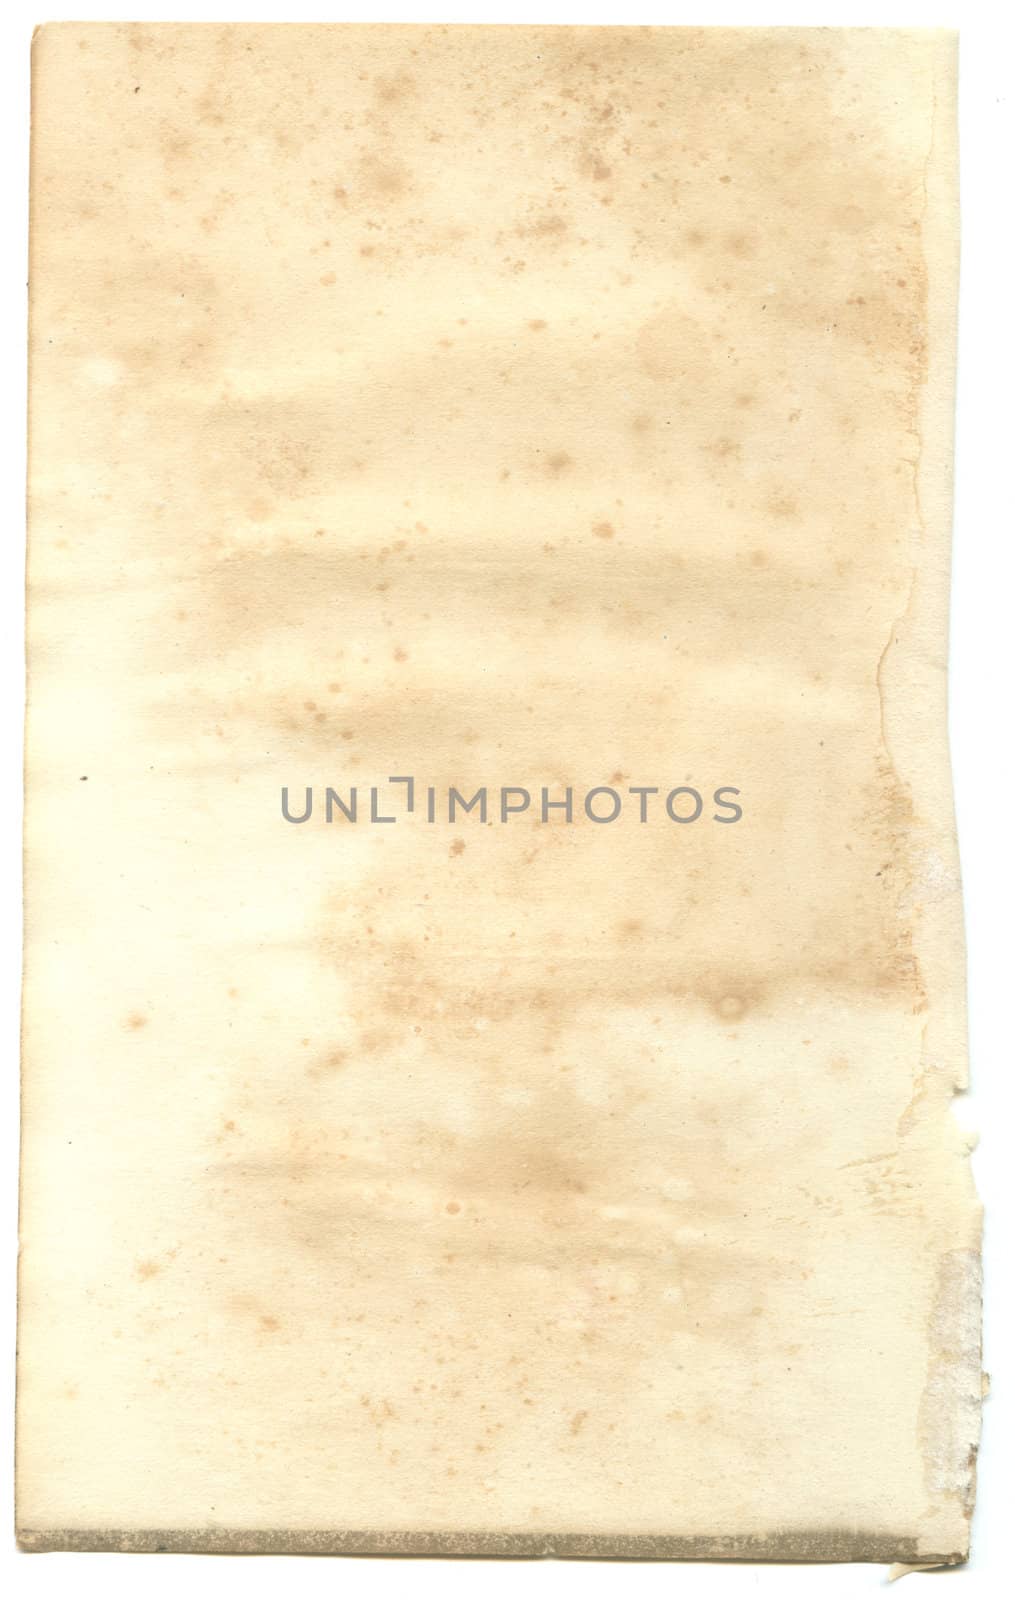 Vintage old paper great for backgrounds. High quality.